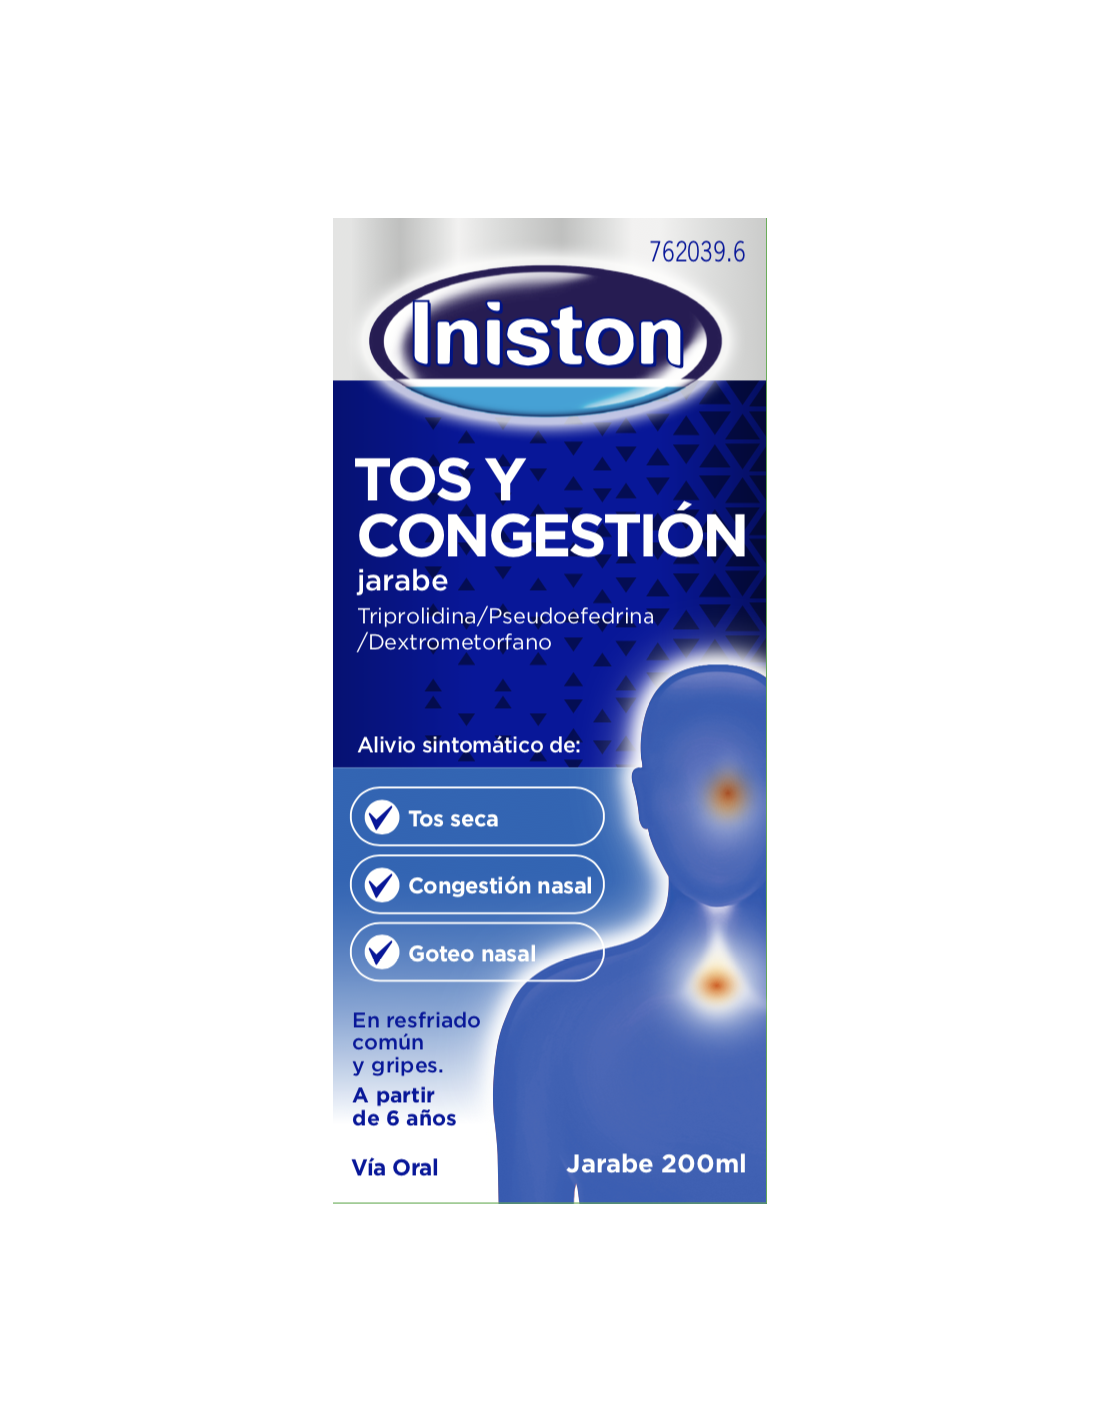 Iniston Antitussive and Decongestant Syrup 200 ml